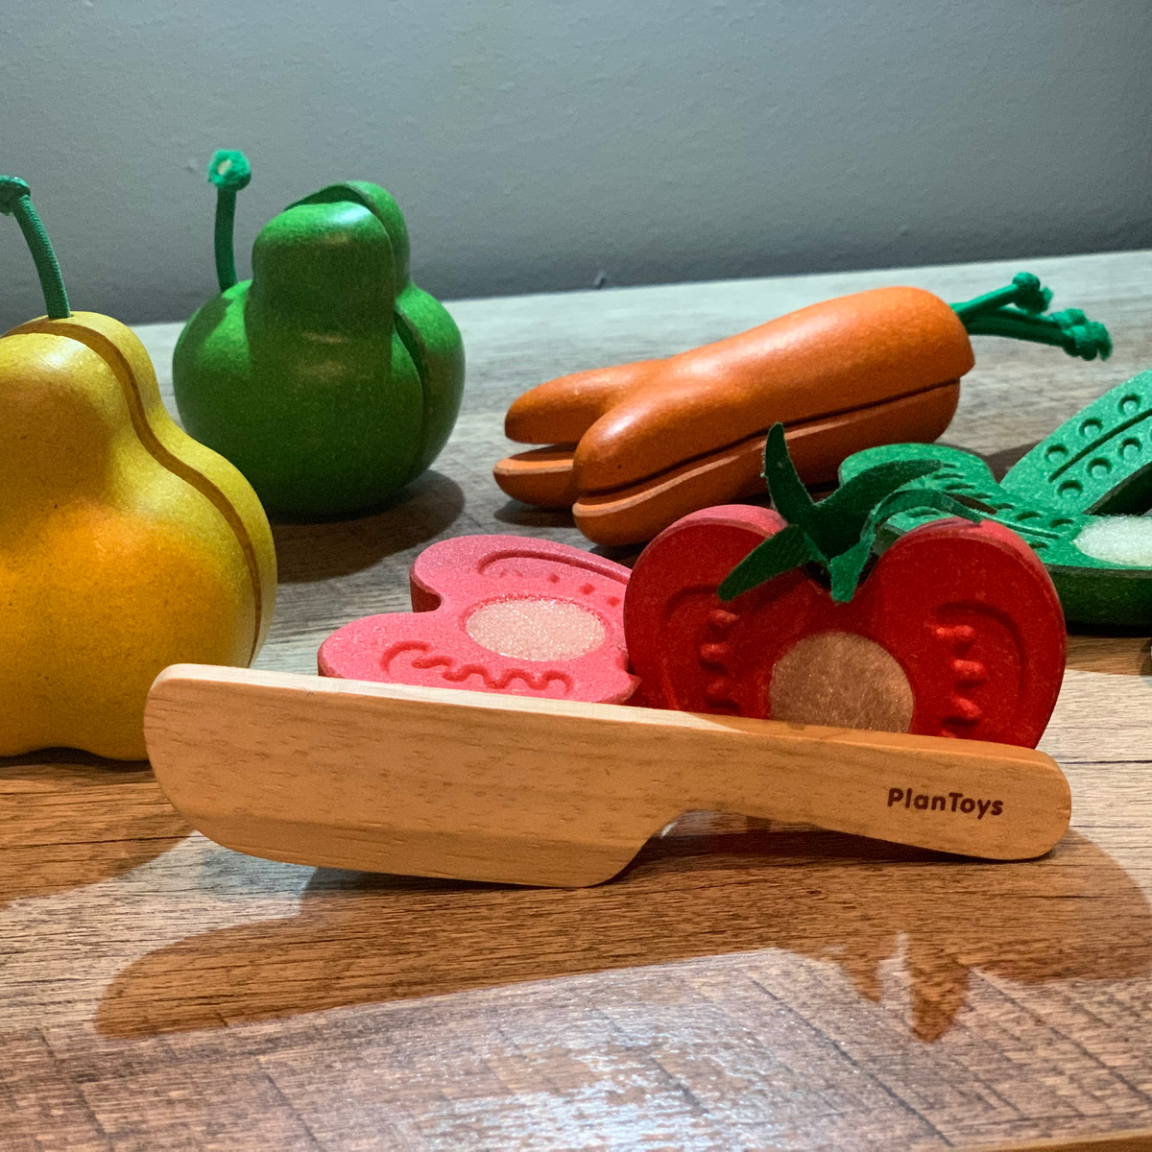 Plan Toys - Wonky Fruit and Vegetables